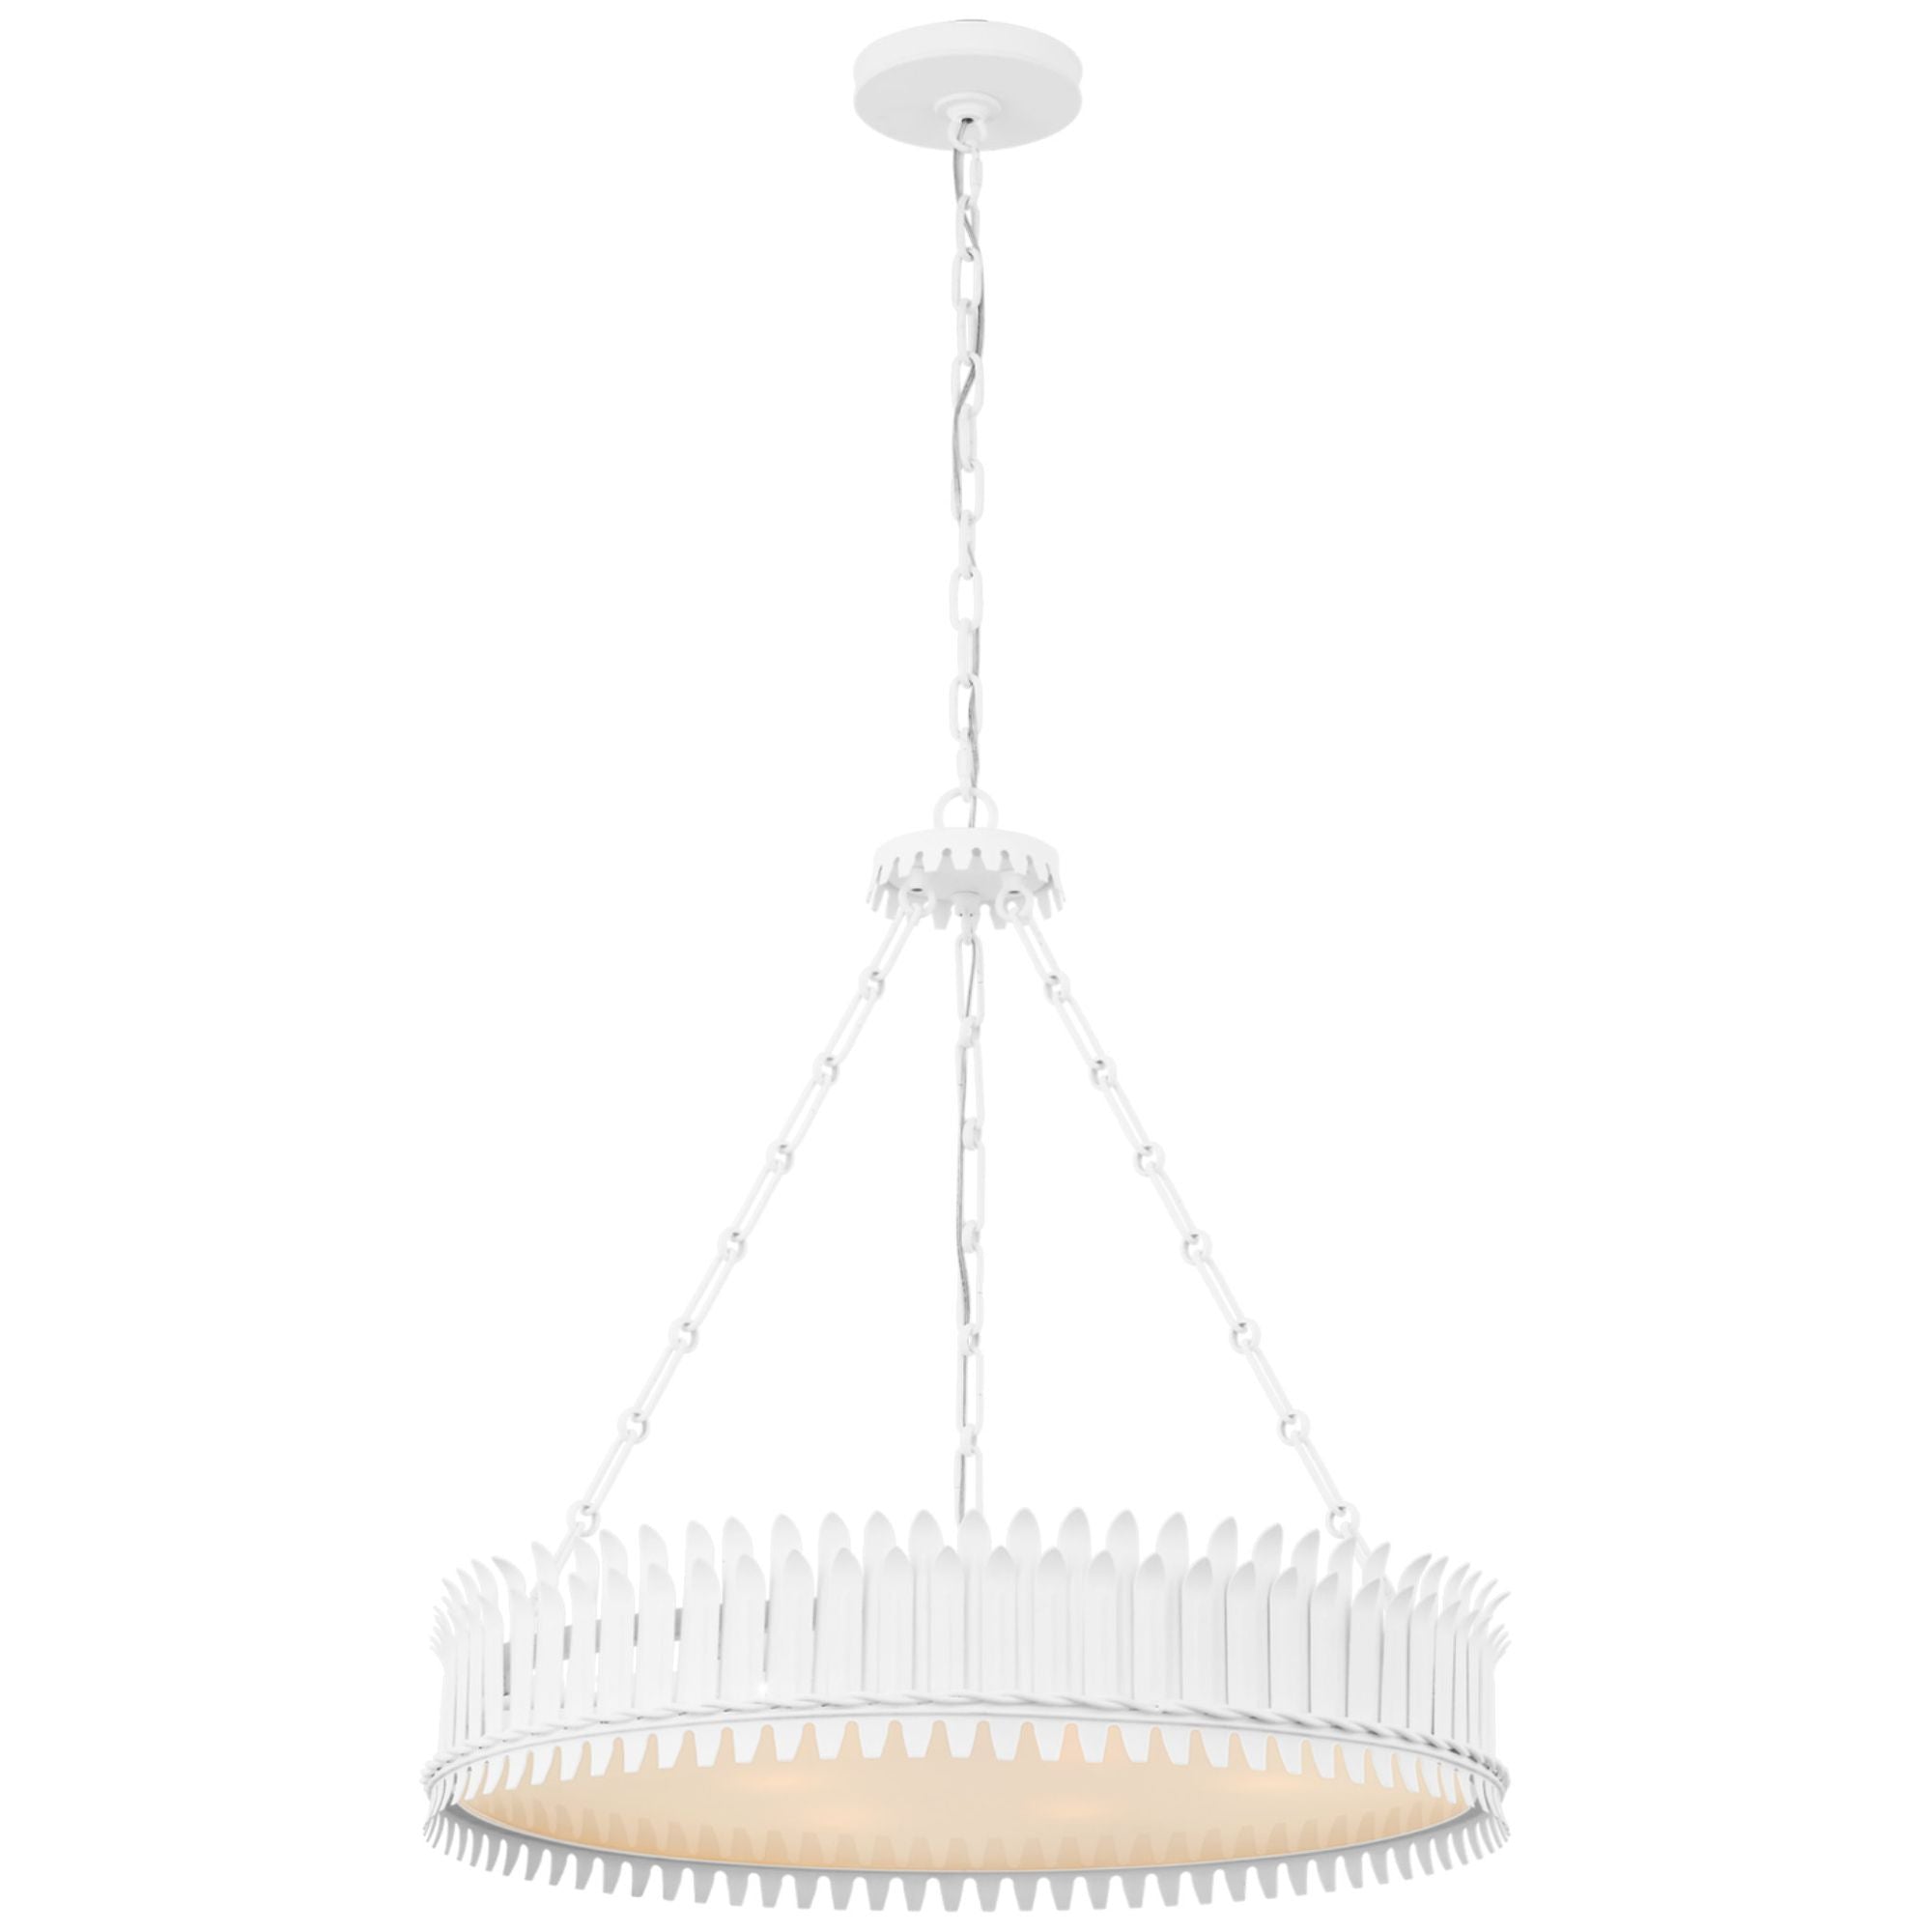 Suzanne Kasler Leslie 27" Chandelier in Plaster White with Frosted Acrylic